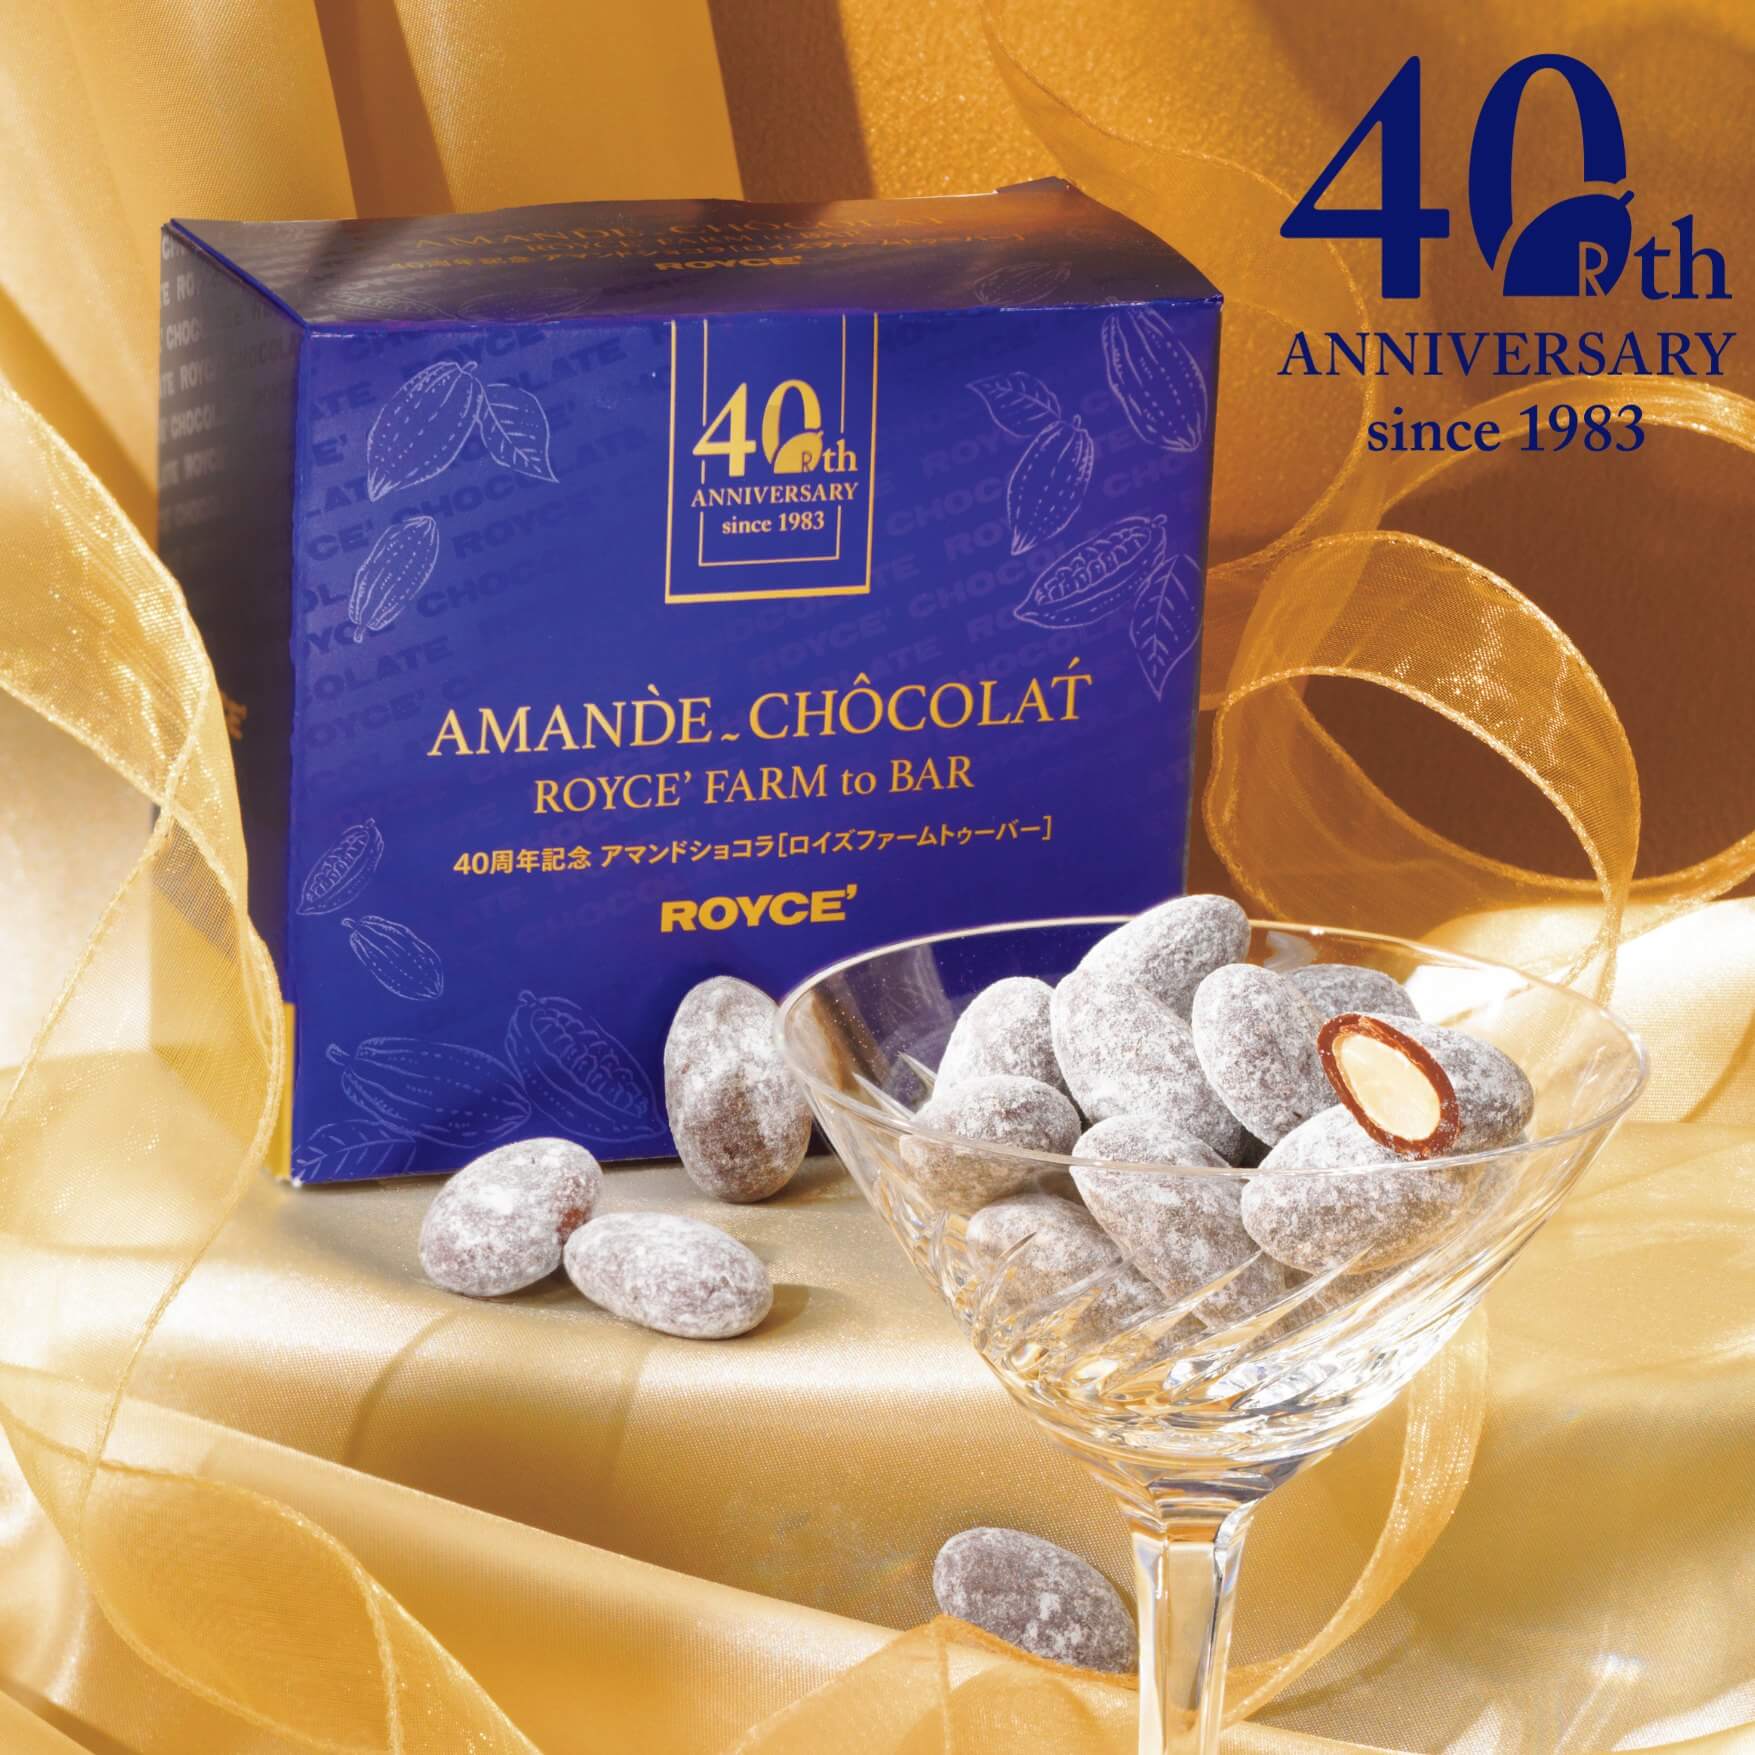 Image shows a cocktail glass with chocolate-coated almonds coated with white sugar powder. Blue box behind has text saying 40th Anniversary since 1983 Amande Chocolat ROYCE' Farm to Bar. ROYCE'. Blue text on upper right says 40th Anniversary since 1983. Background is in gold.